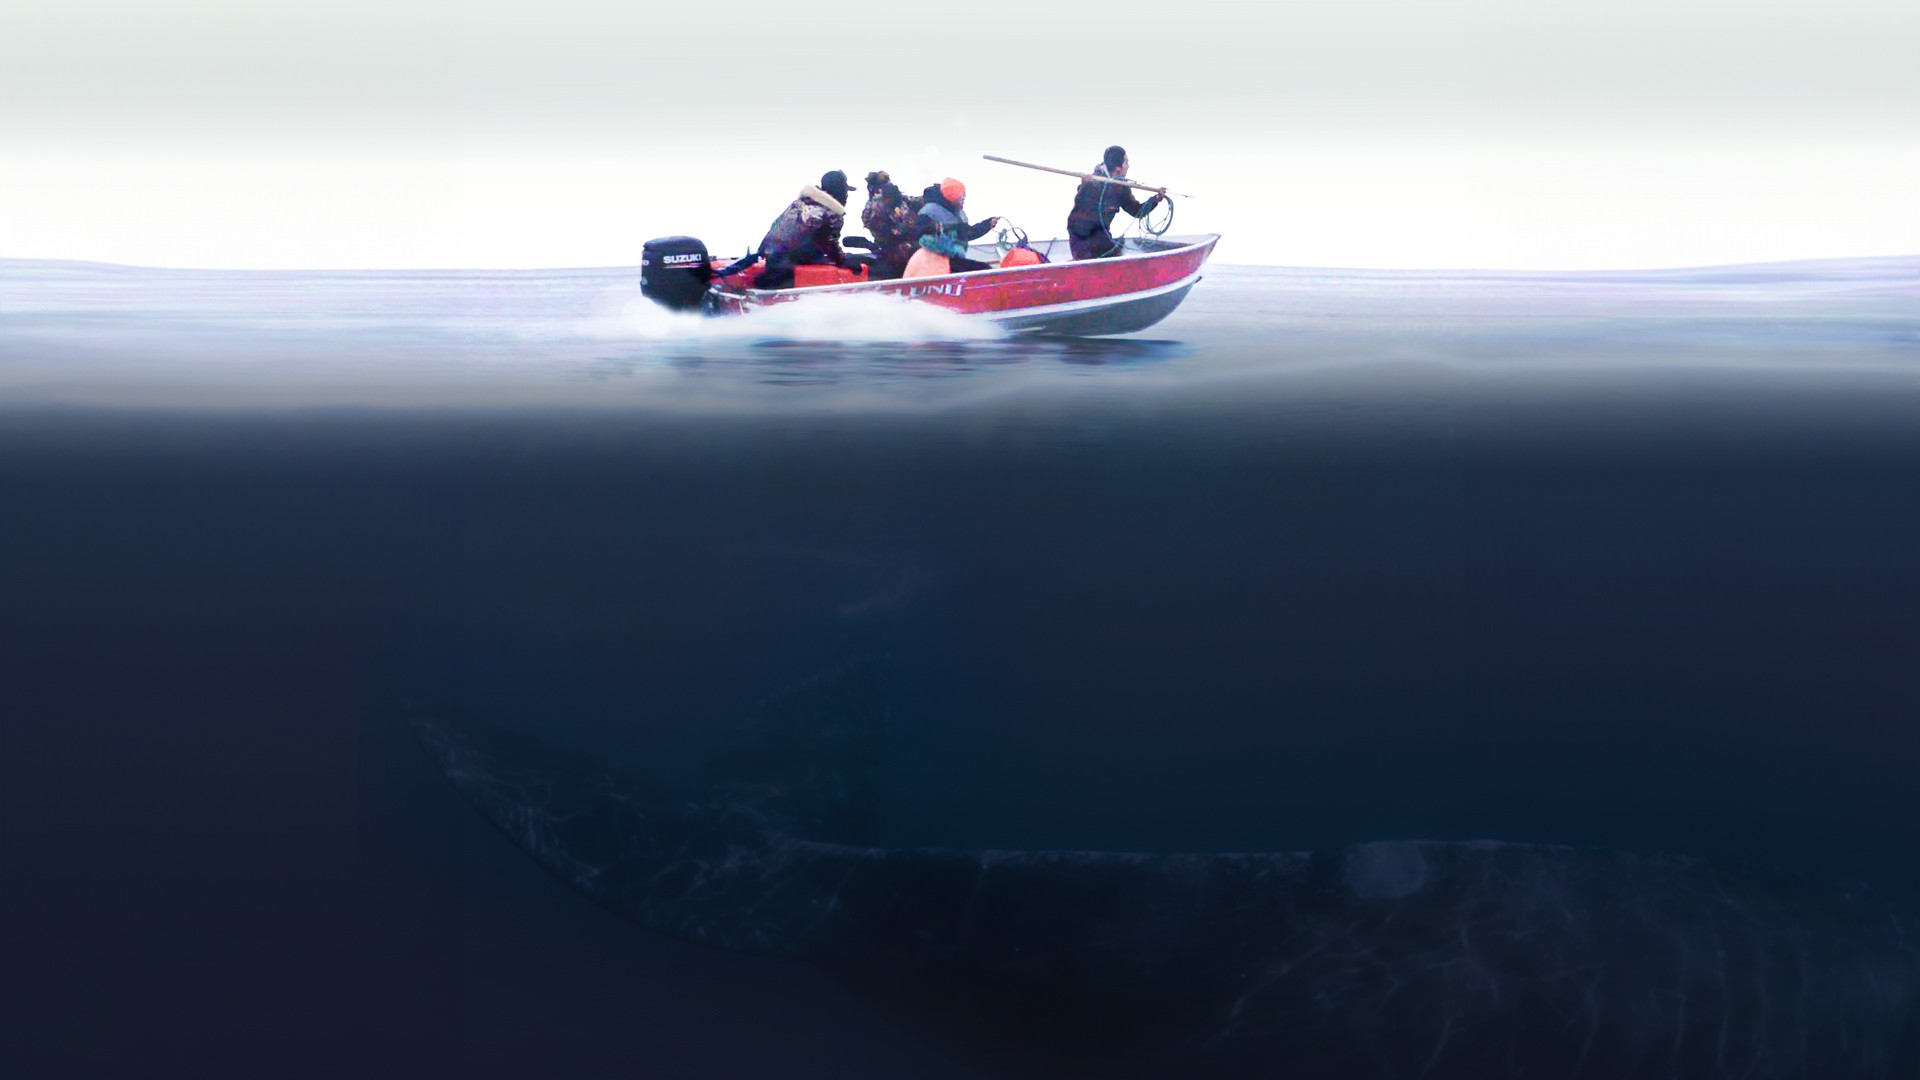 Four fishermen on a red fishing boat on the ocean